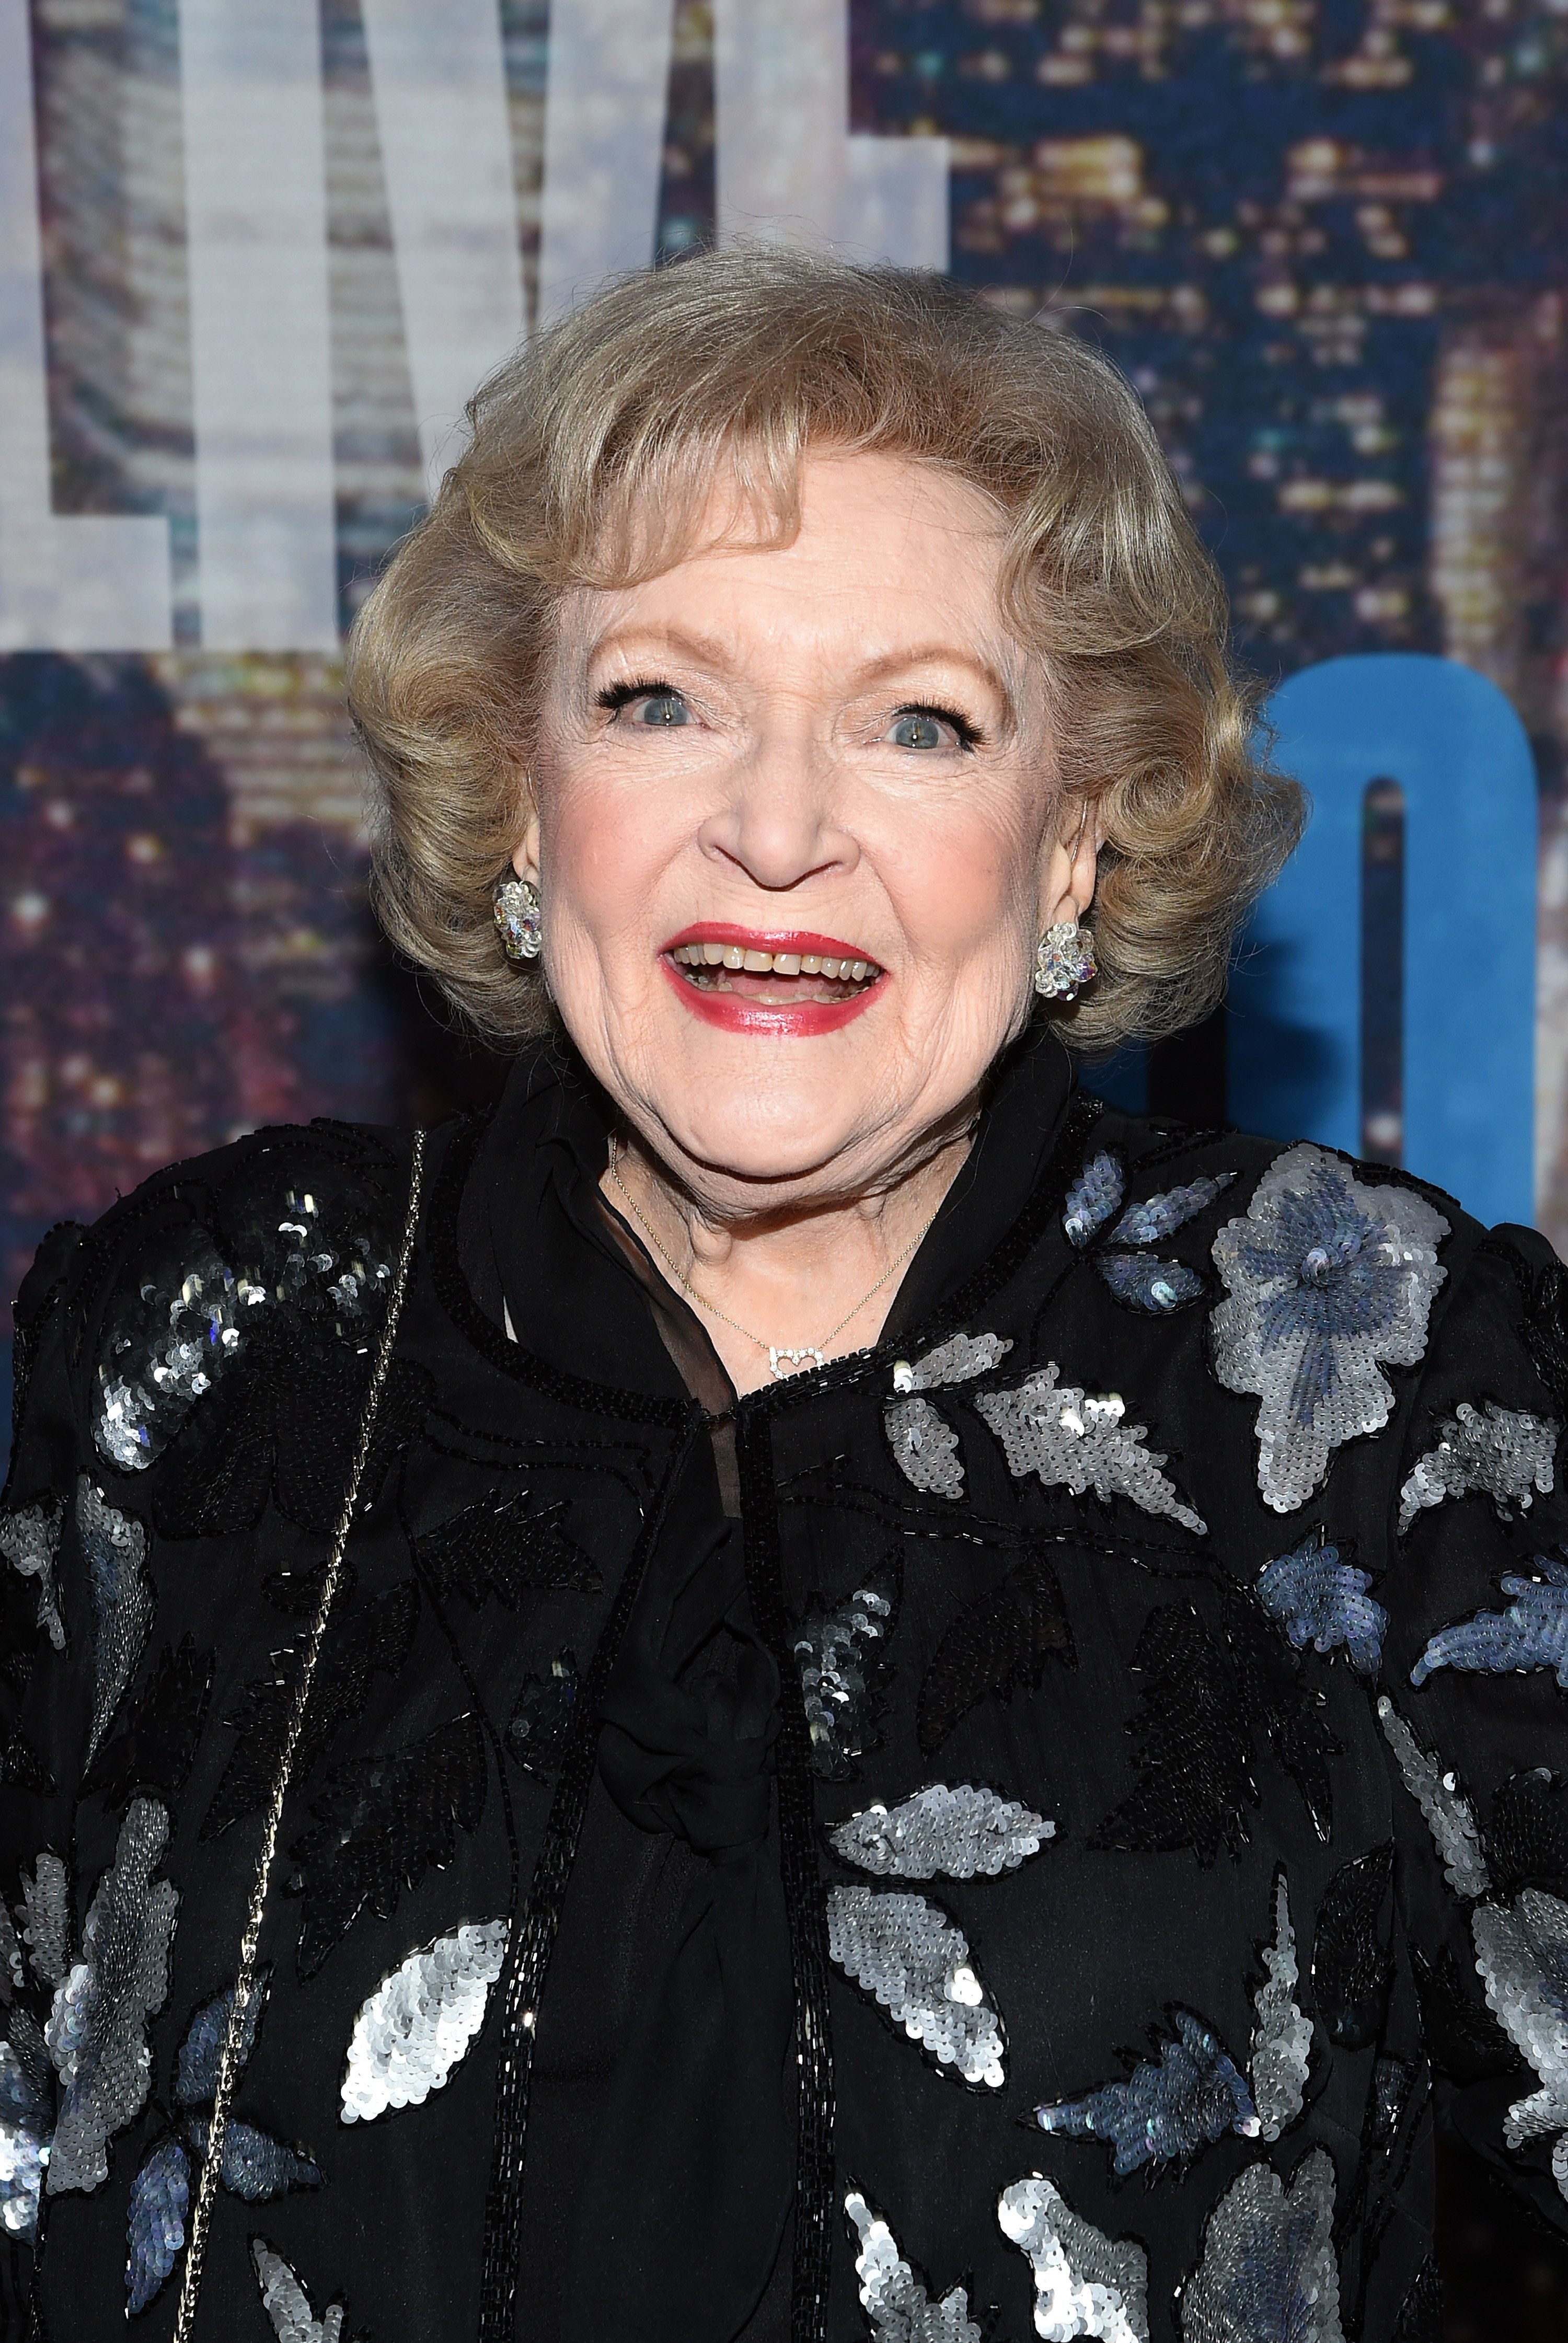 Betty White at SNL's 40th Anniversary Celebration on February 15, 2015, in New York City. | Source: Getty Images